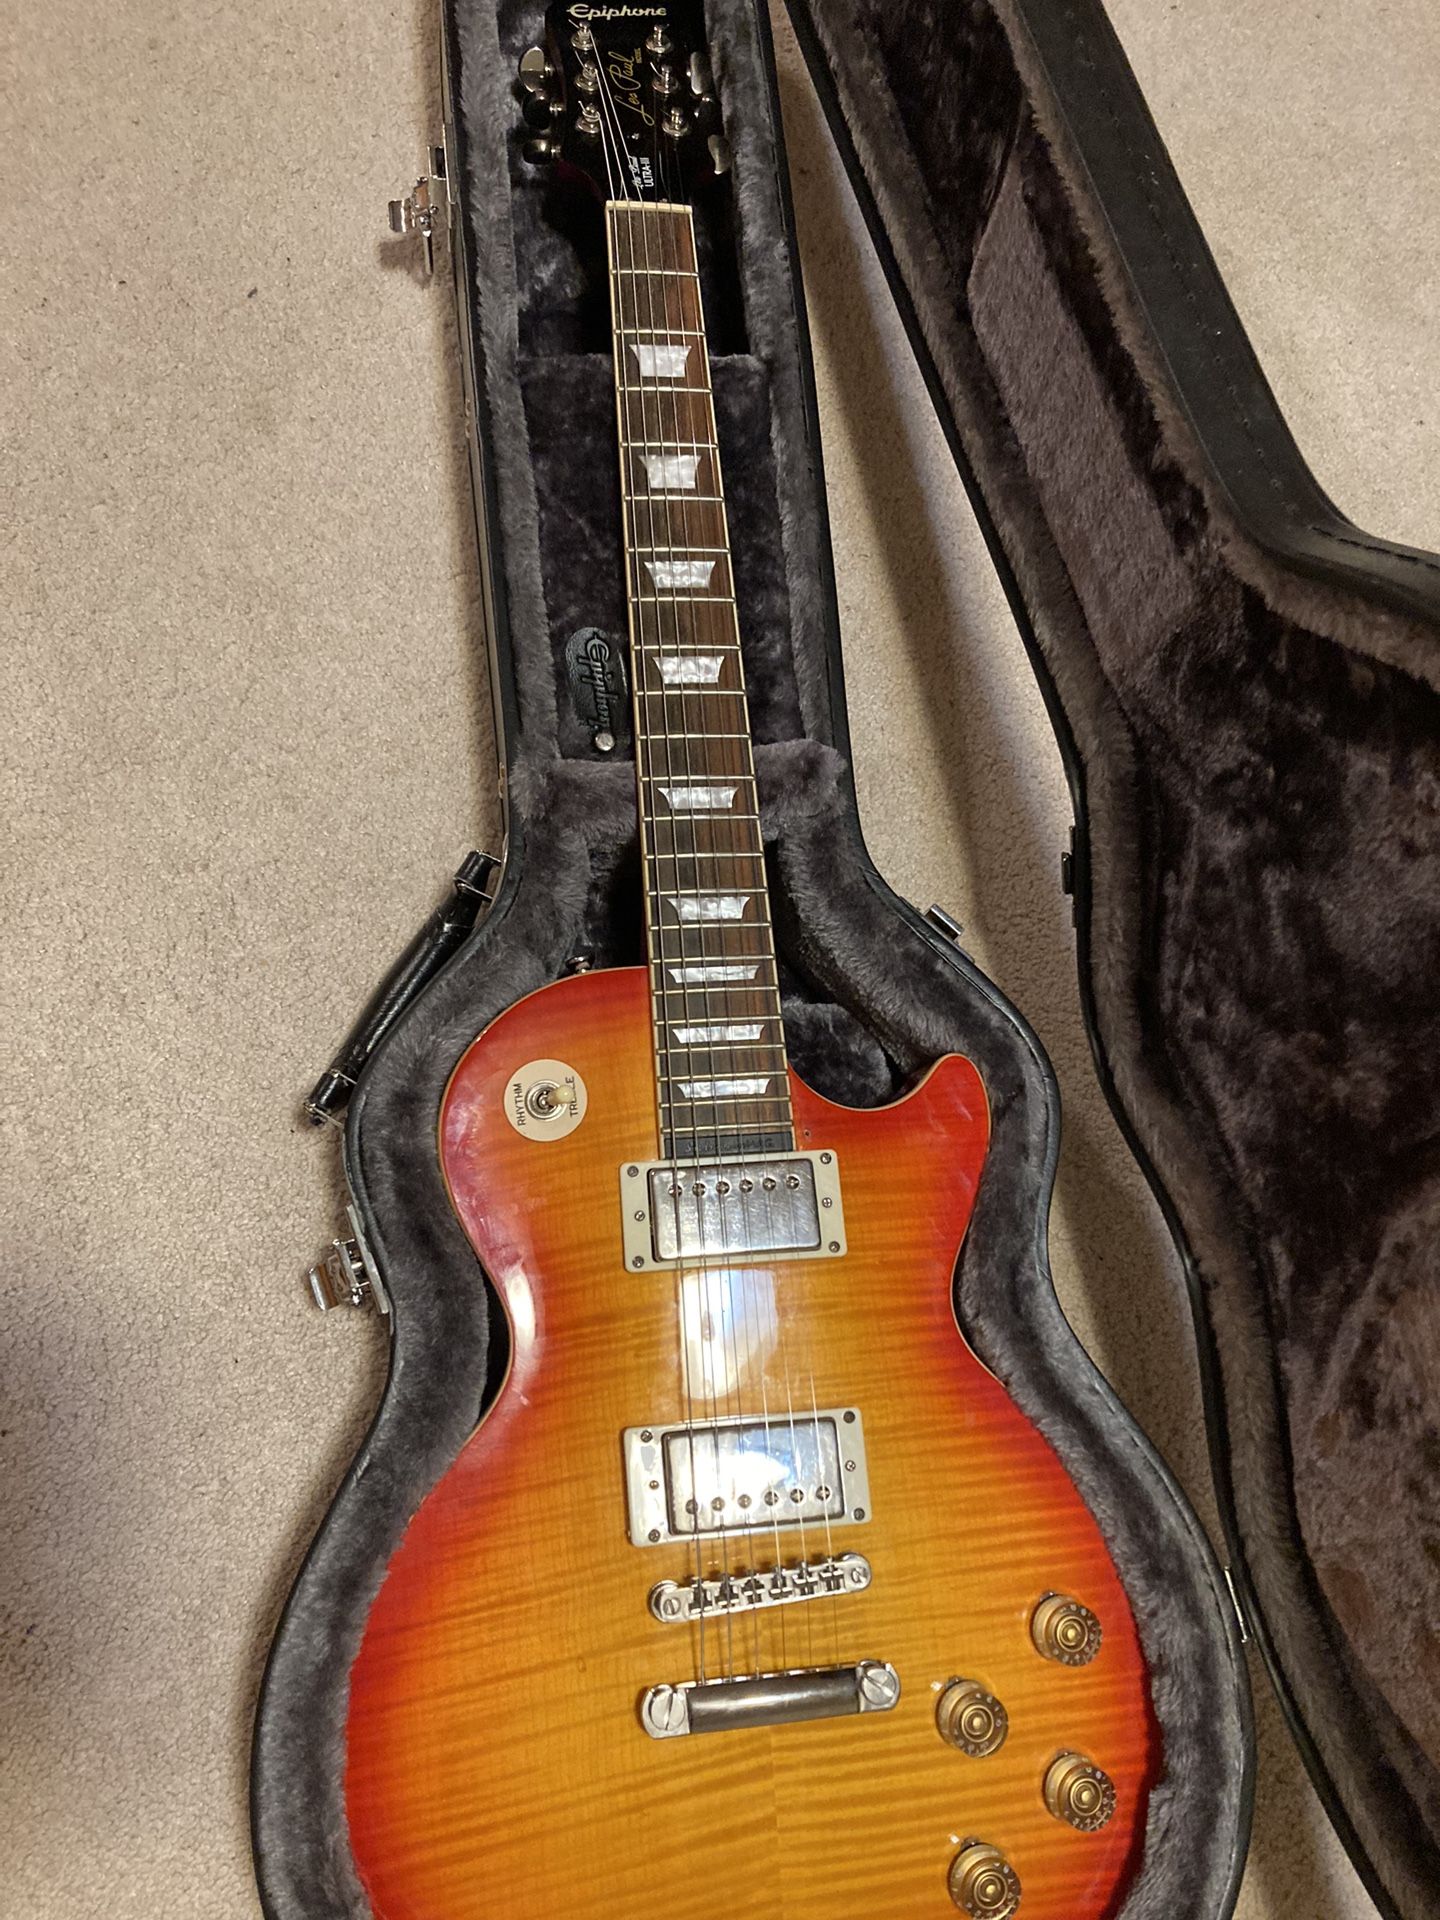 Epiphone Les Paul Ultra III (hard case Included)y